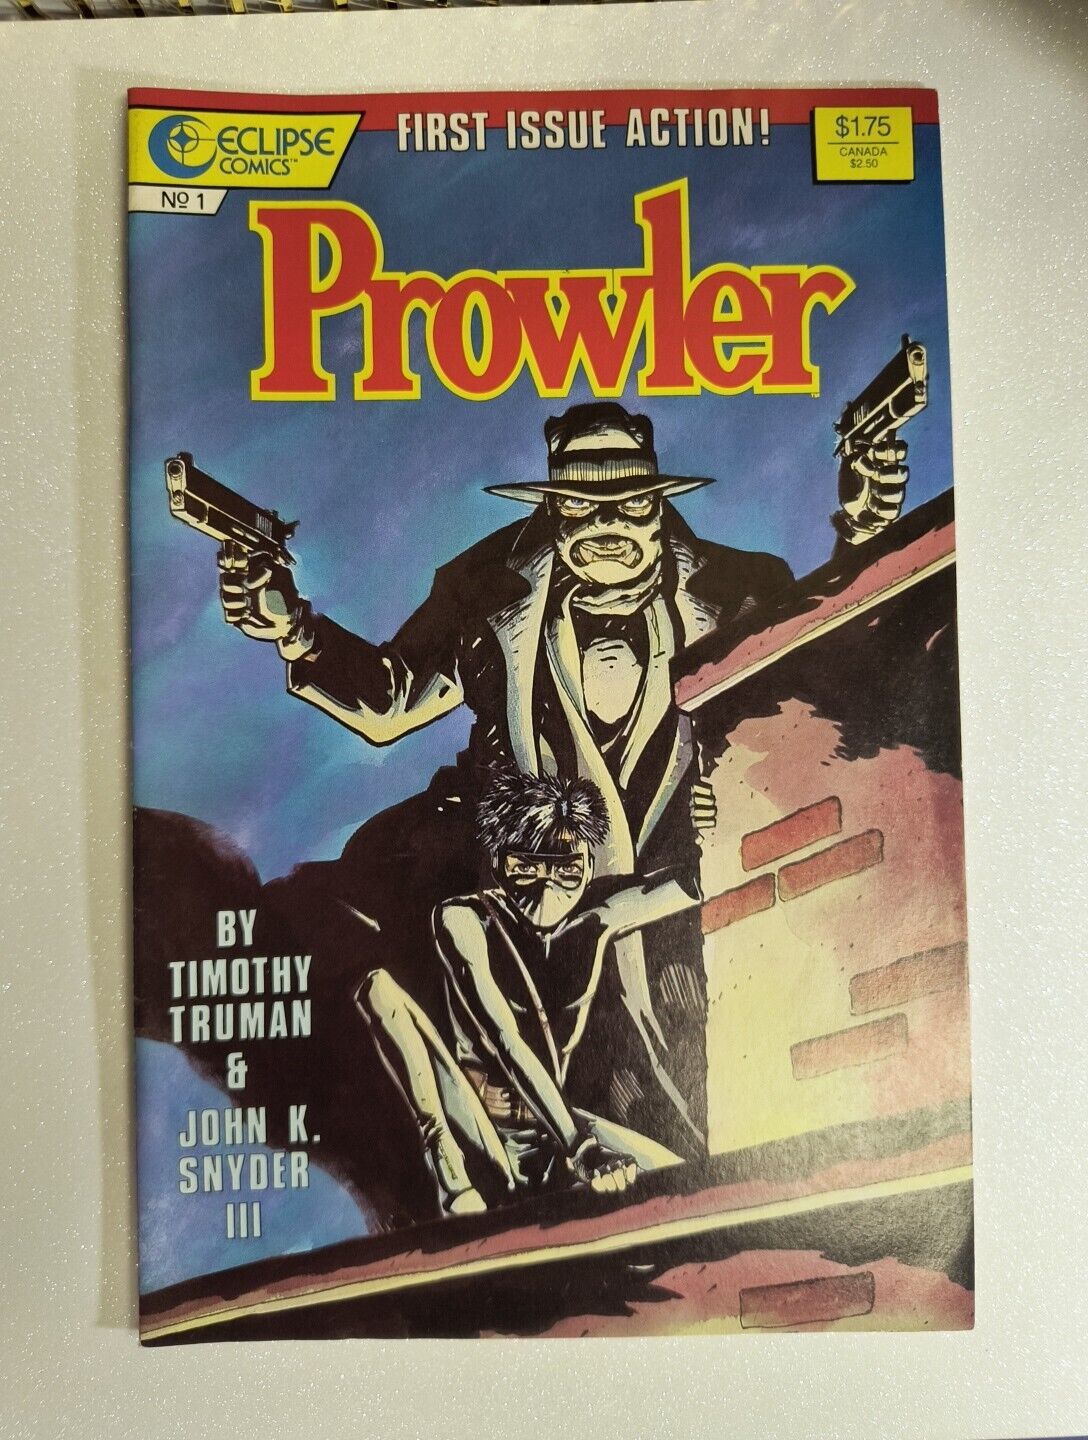 Prowler No.1, First Issue Action,Eclipse